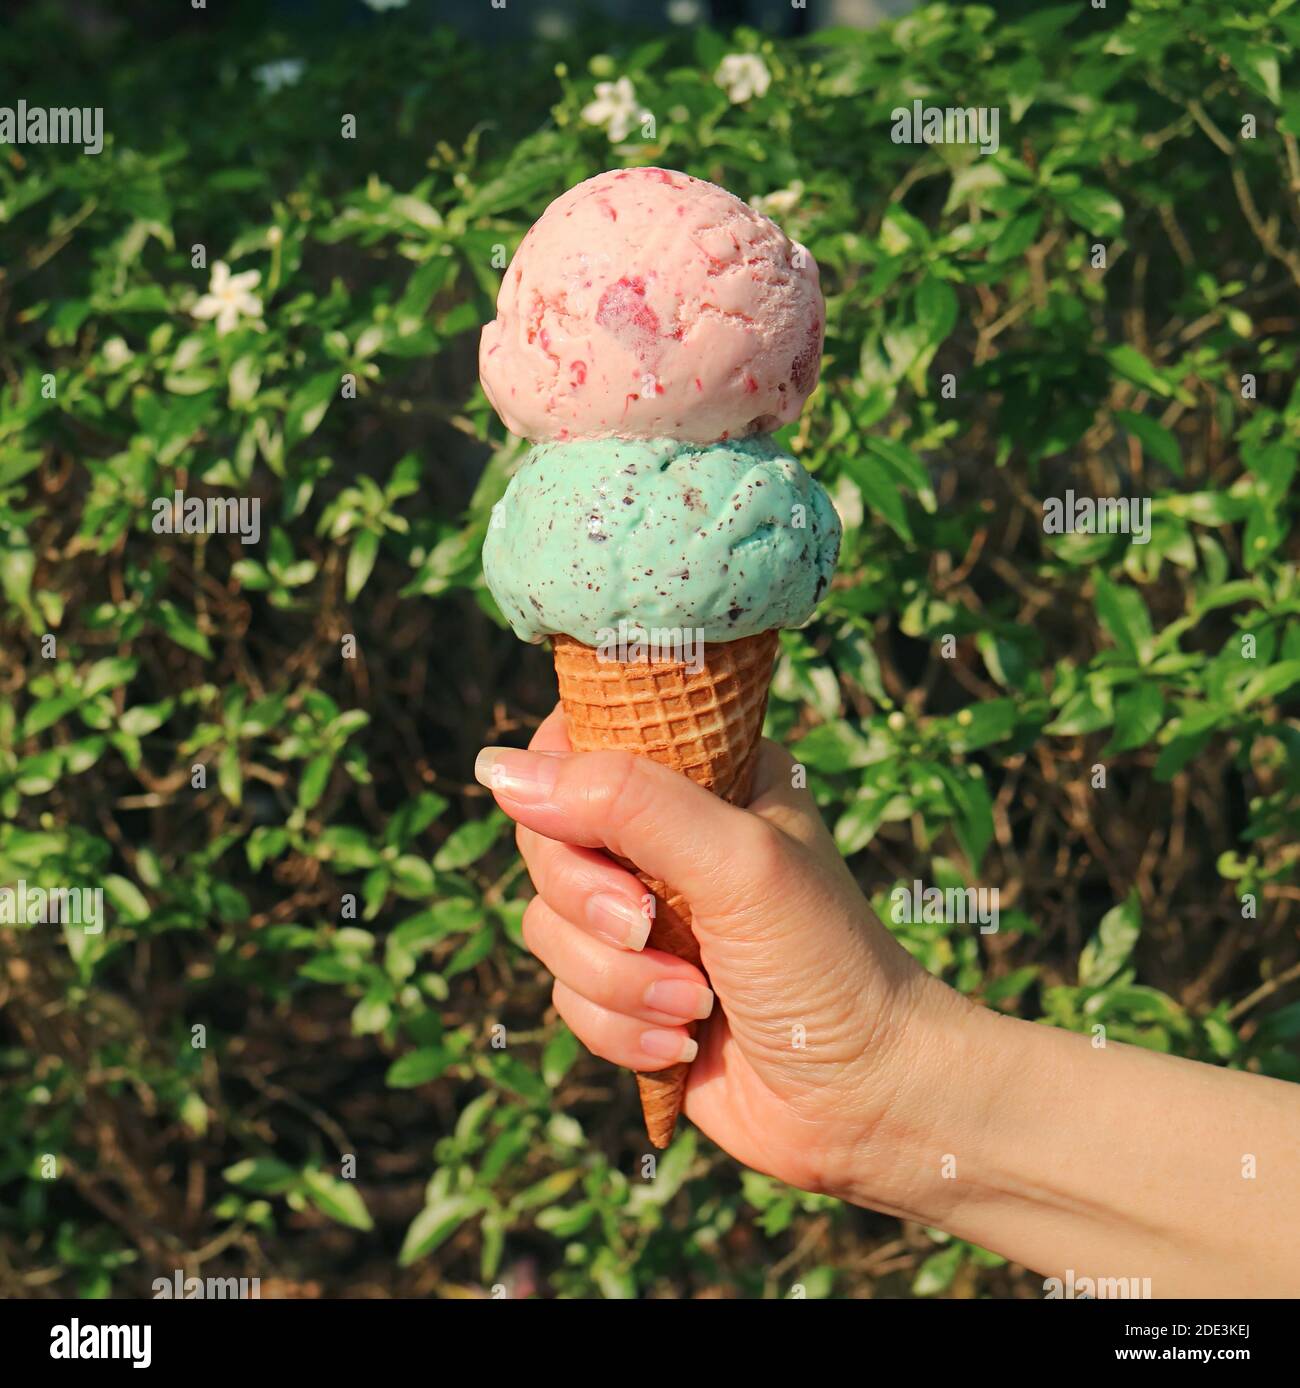 Two scoops of ice cream cone in woman's hand melting in the sunlight Stock Photo